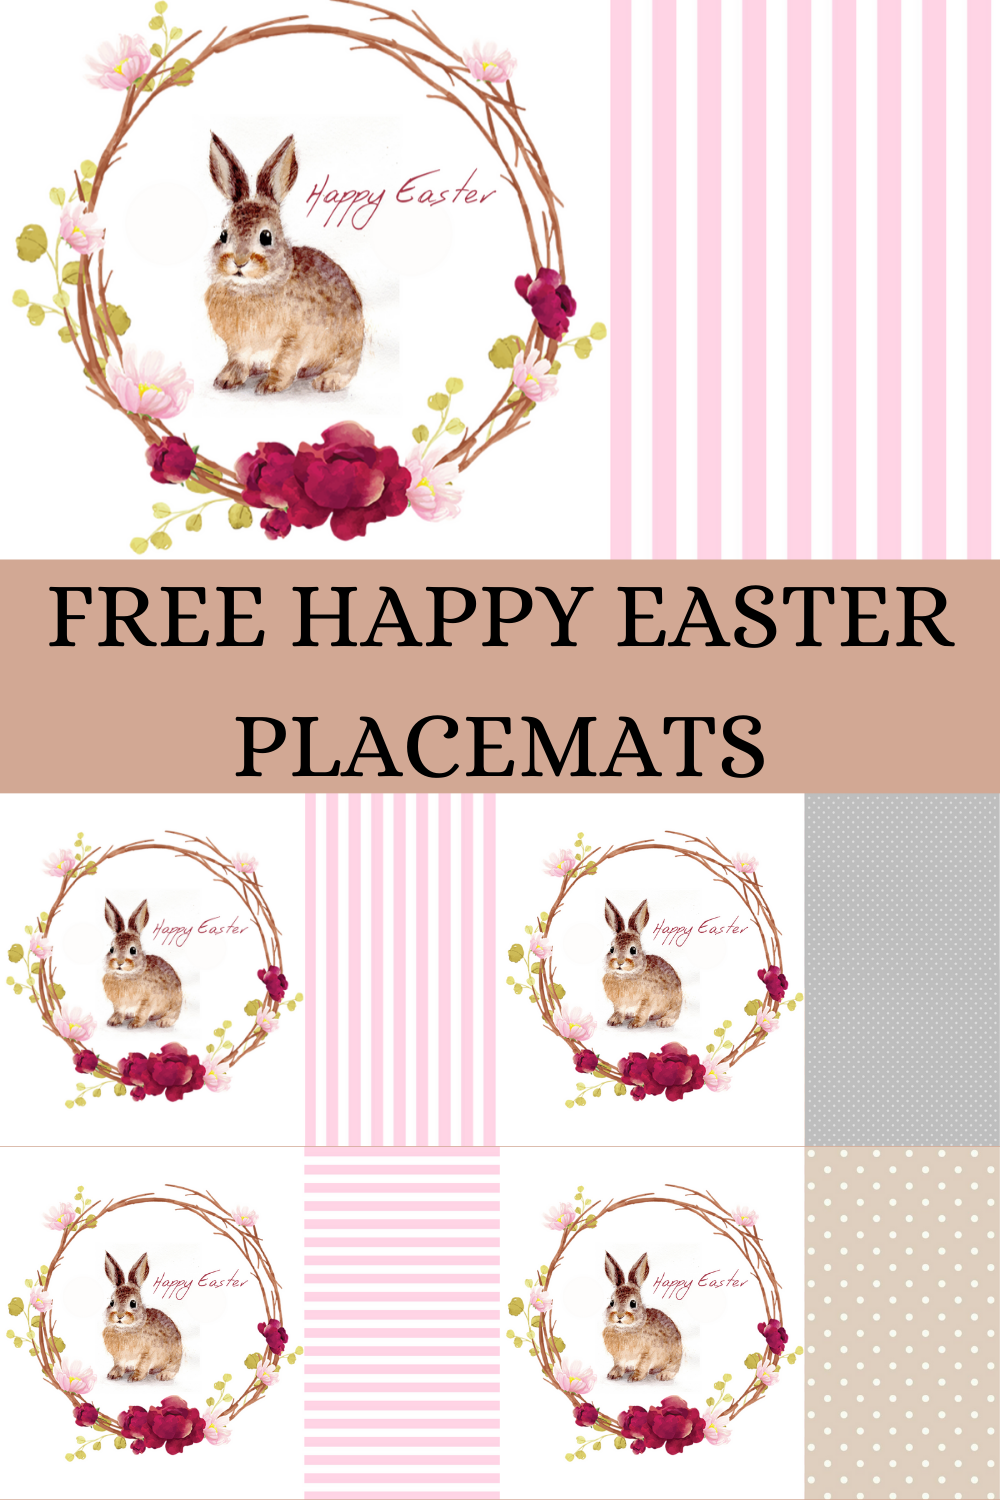 free-easter-printable-placemats-home-chic-club-free-easter-printable